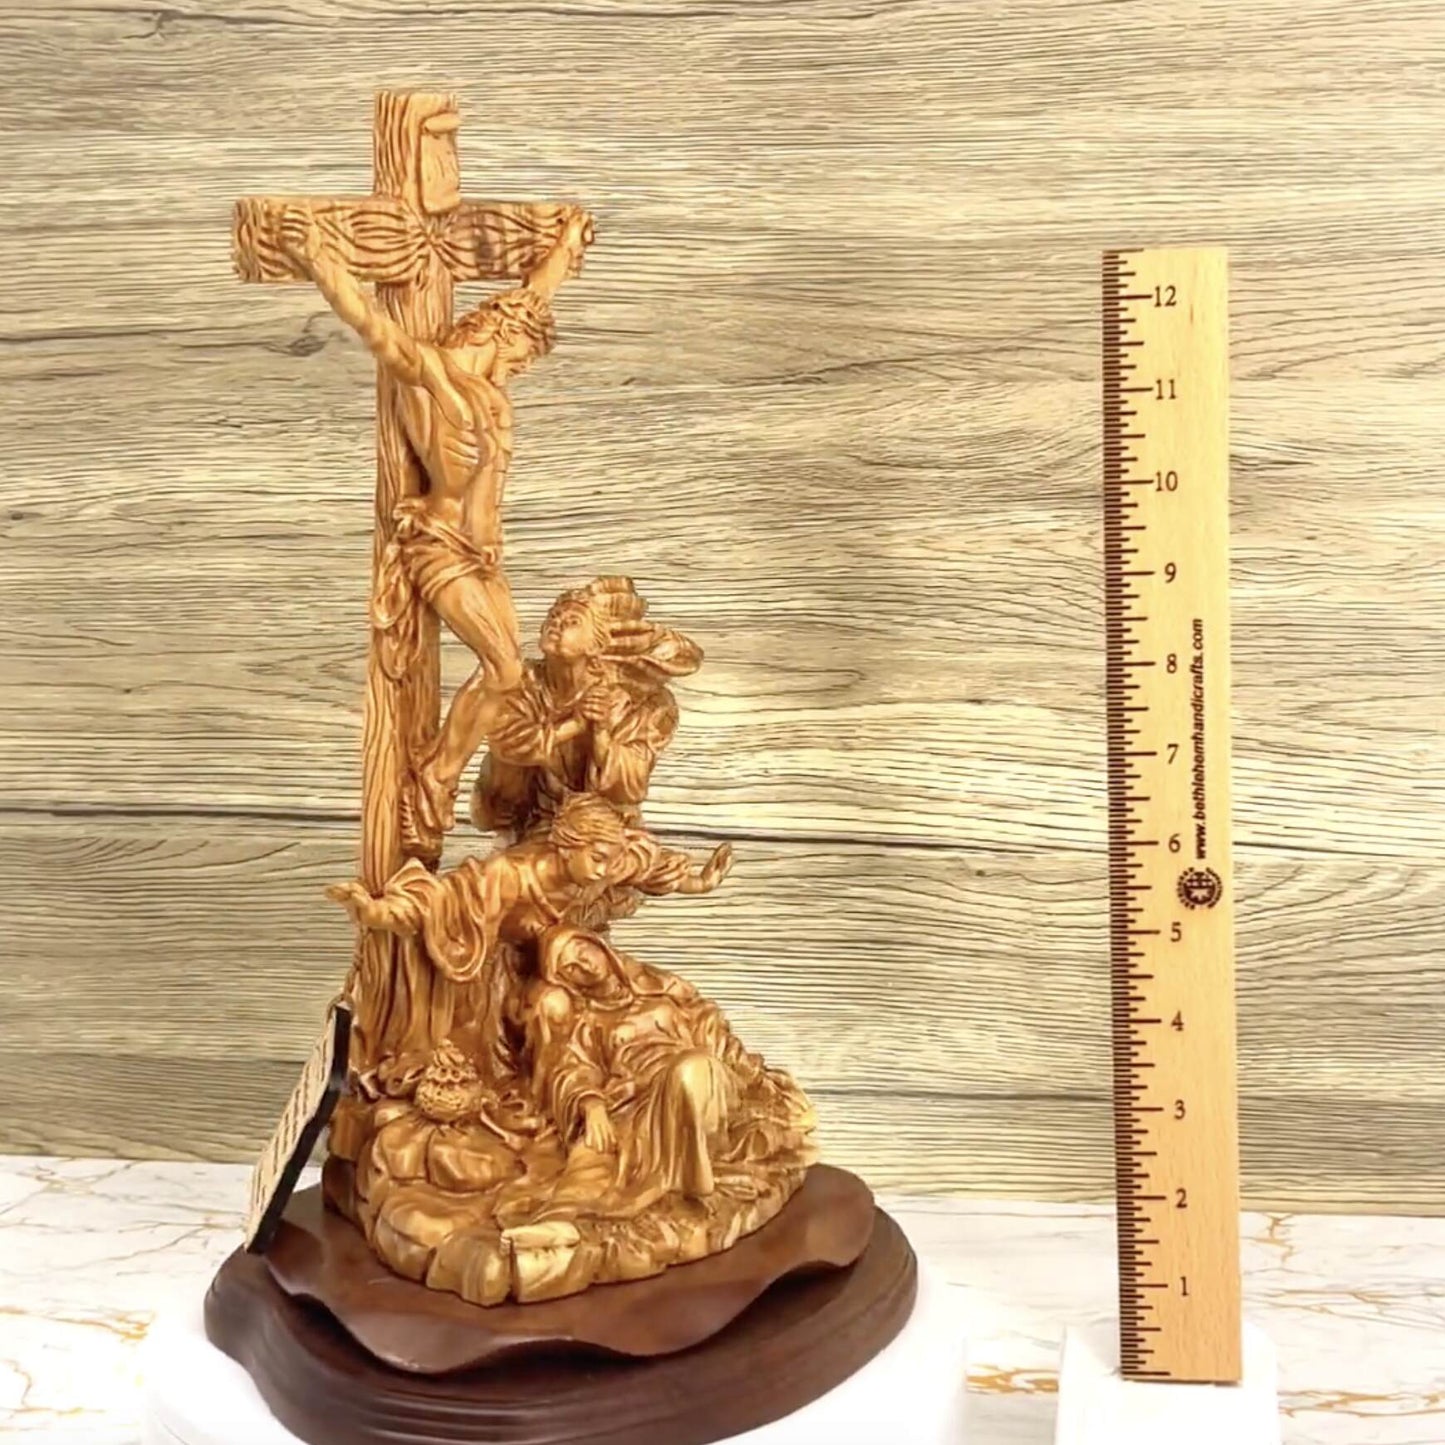 Christ Crucified on Cross with Mary Magdalene and St. John 14.4", Olive Wood Statue